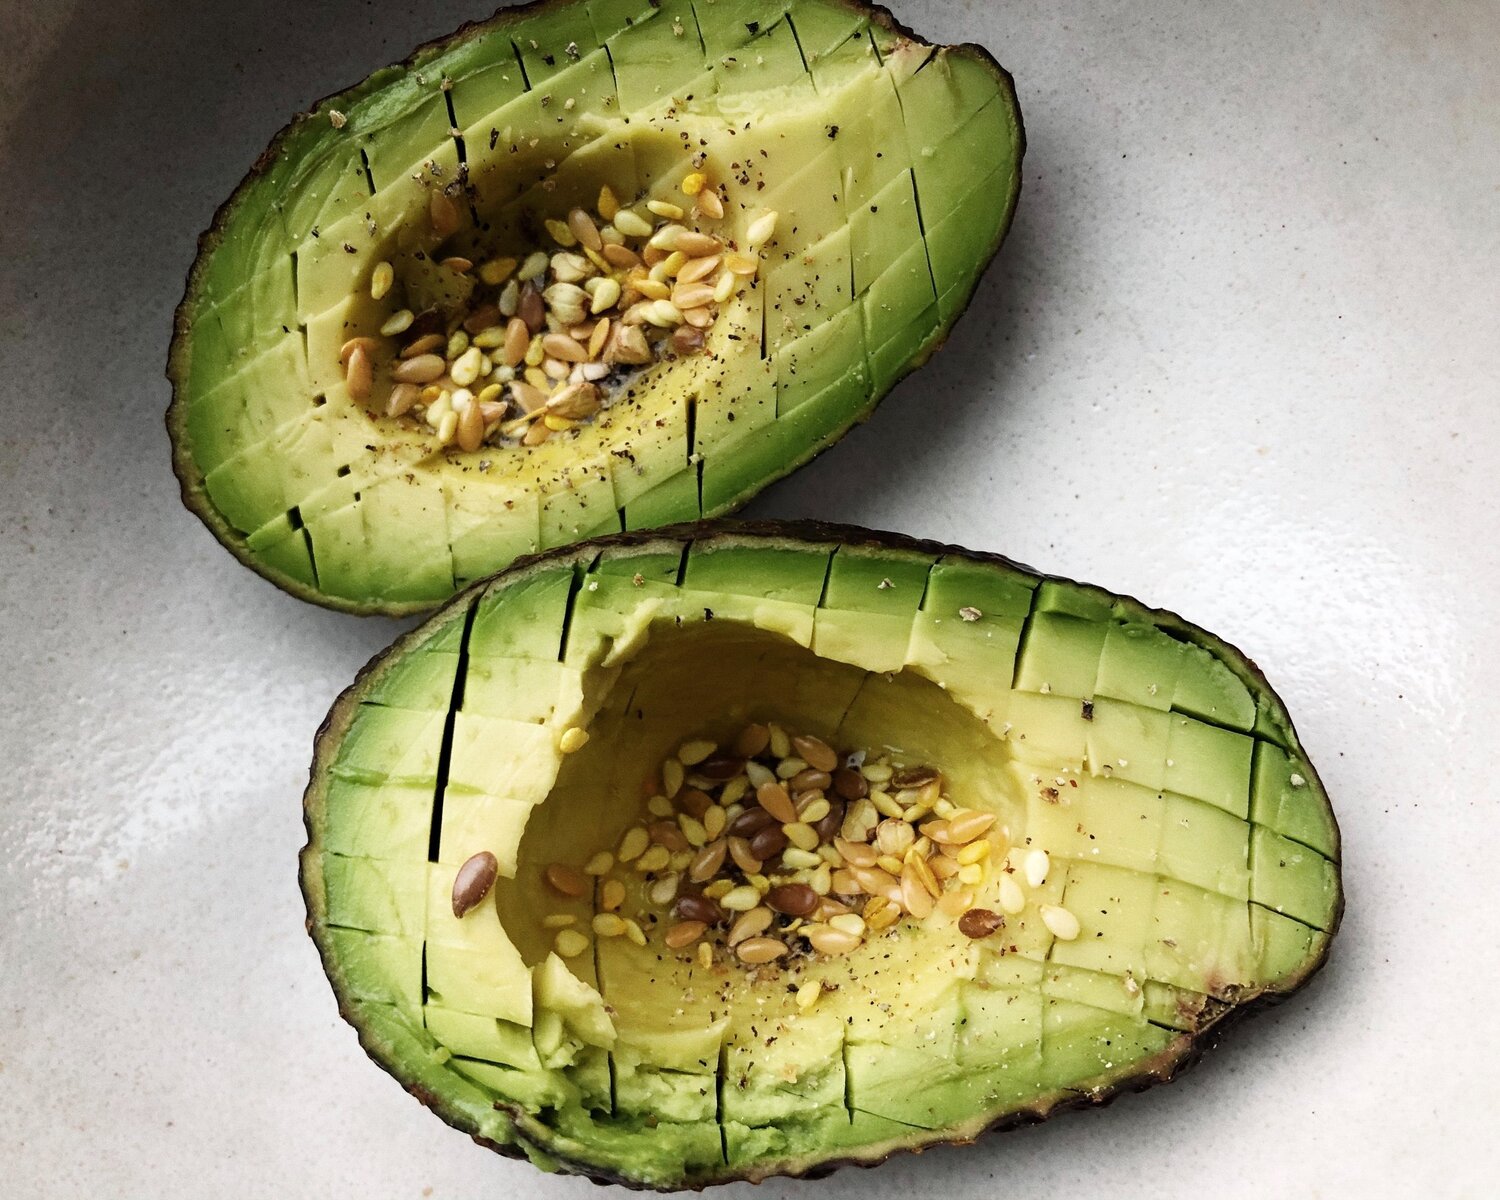 Avocados are one of nature’s most perfect foods and highly versatile. Spread it on whole grain toast or crackers and add to salads, soups, and smoothies.